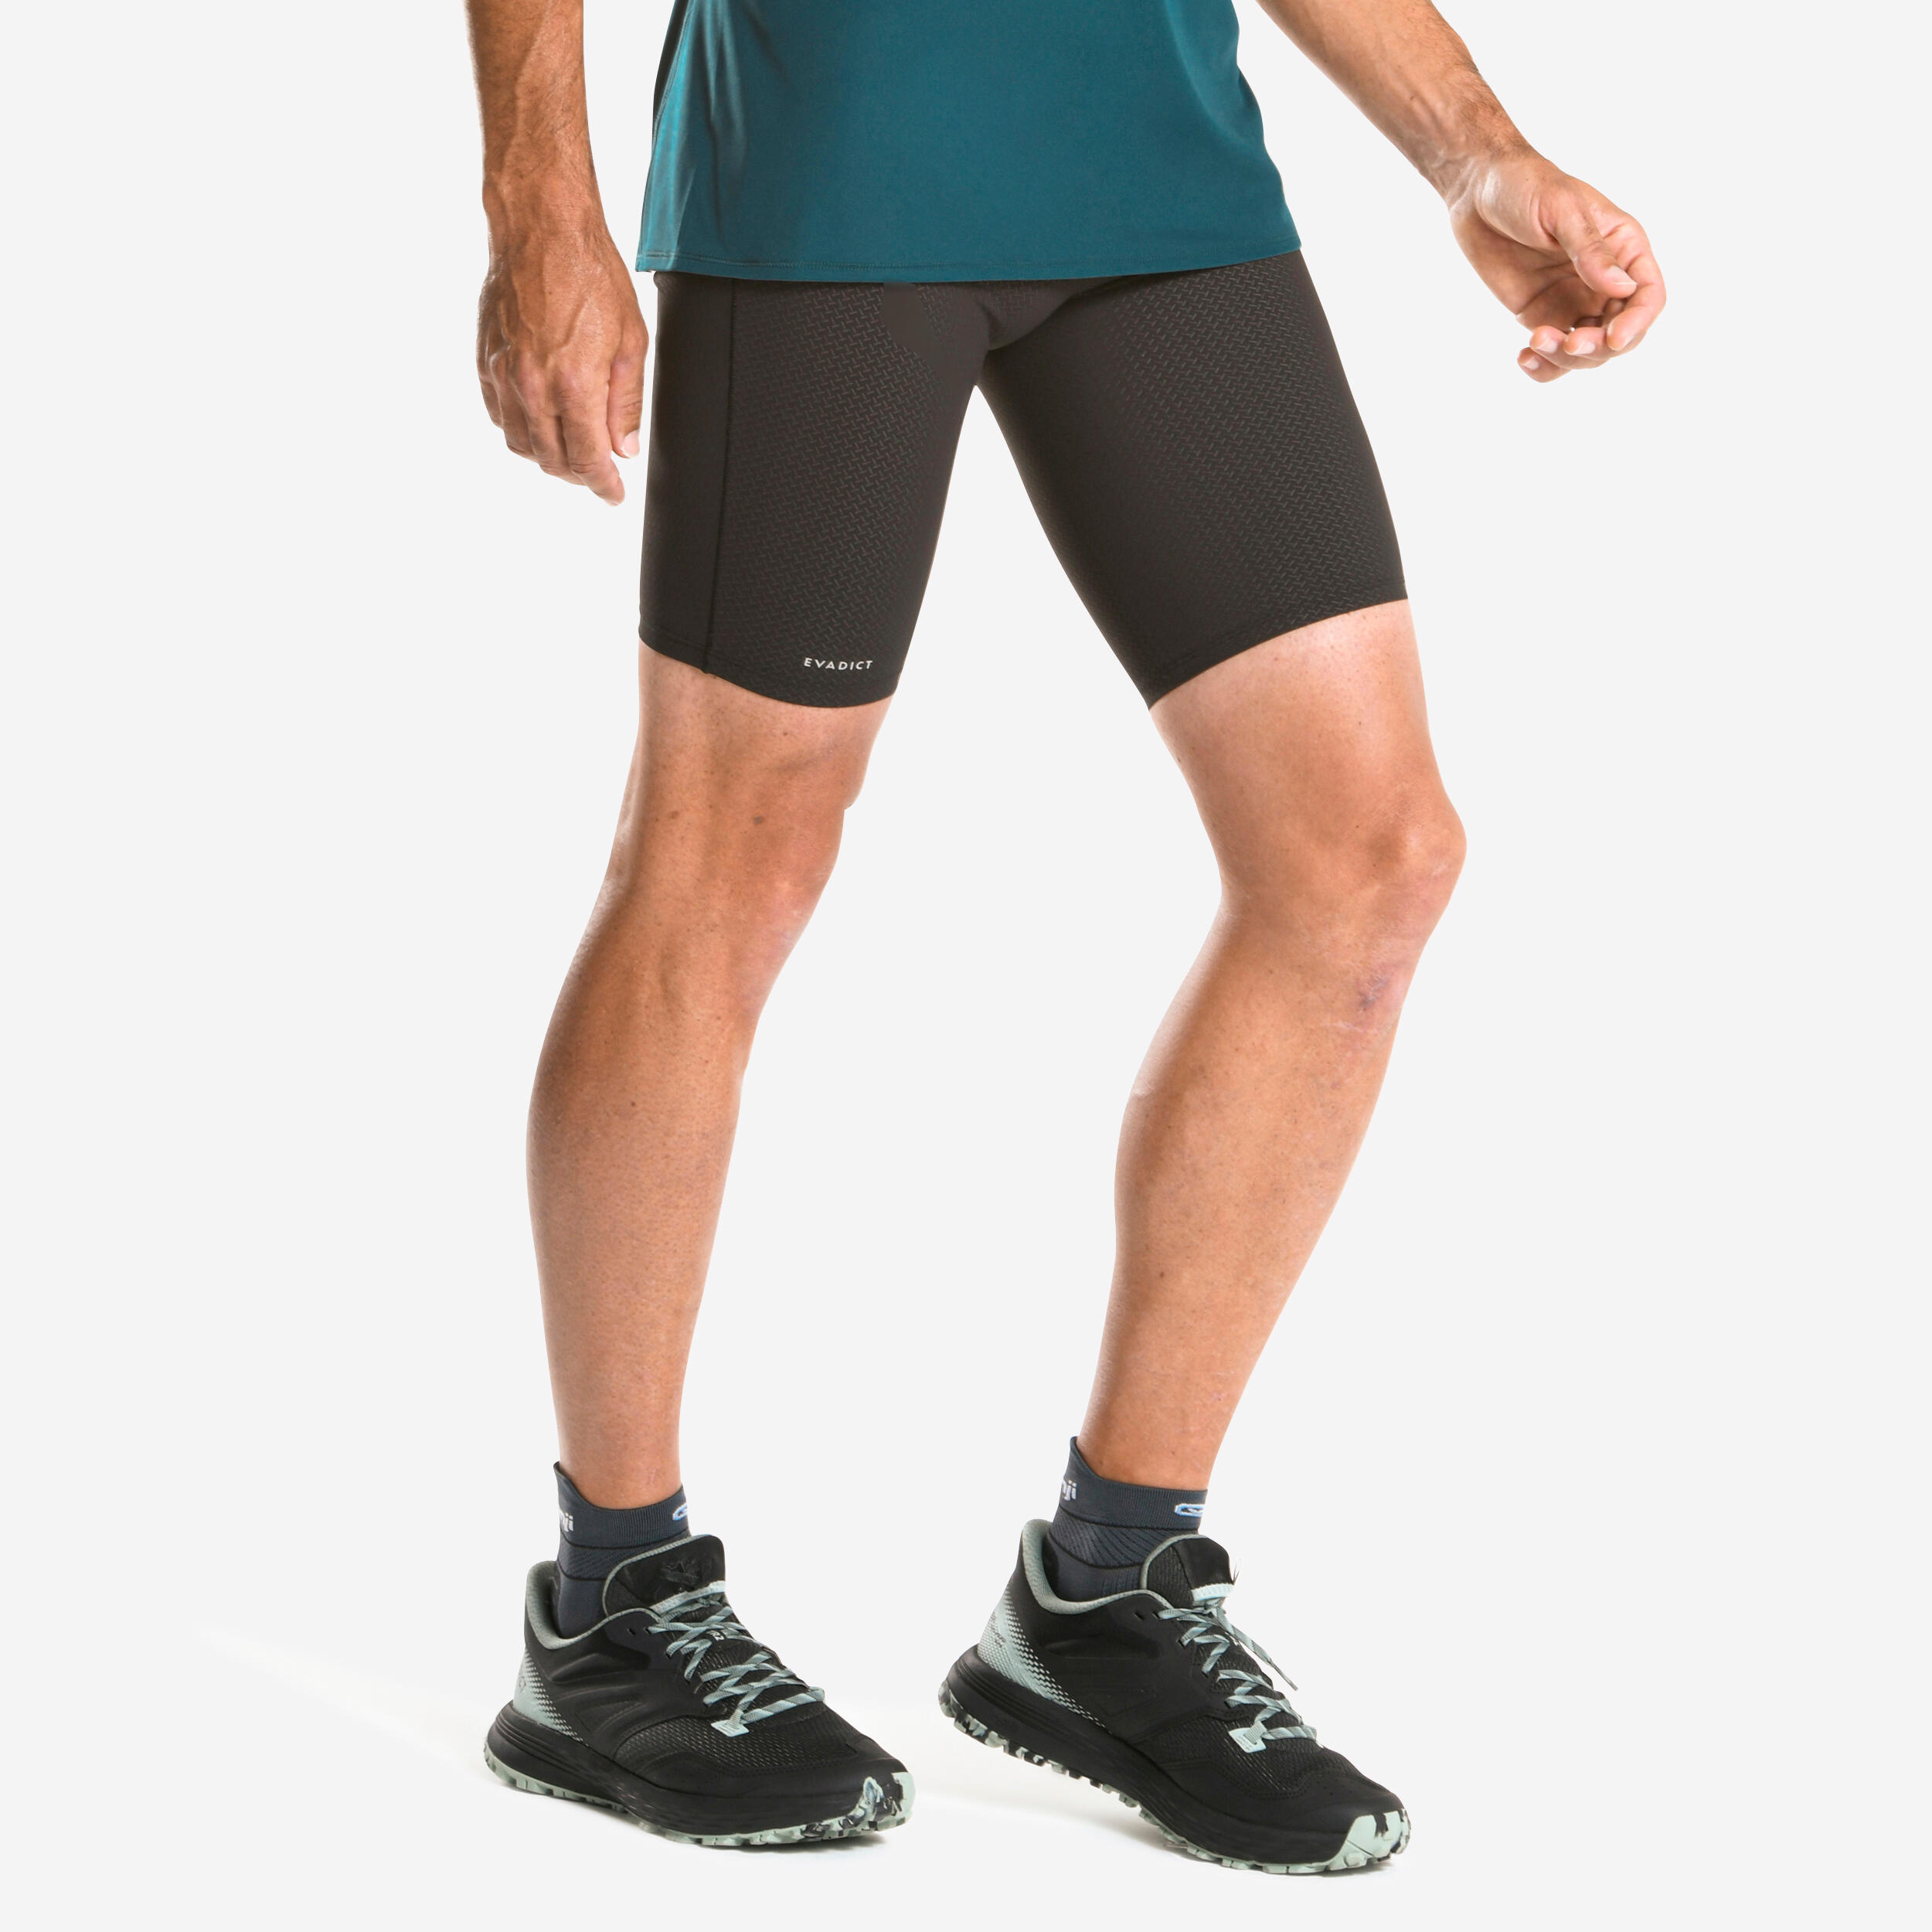 Decathlon Men's Performance Running Compression Tights - Black KIPRUN   Reference: 8396347, Sports Equipment, Other Sports Equipment and Supplies  on Carousell